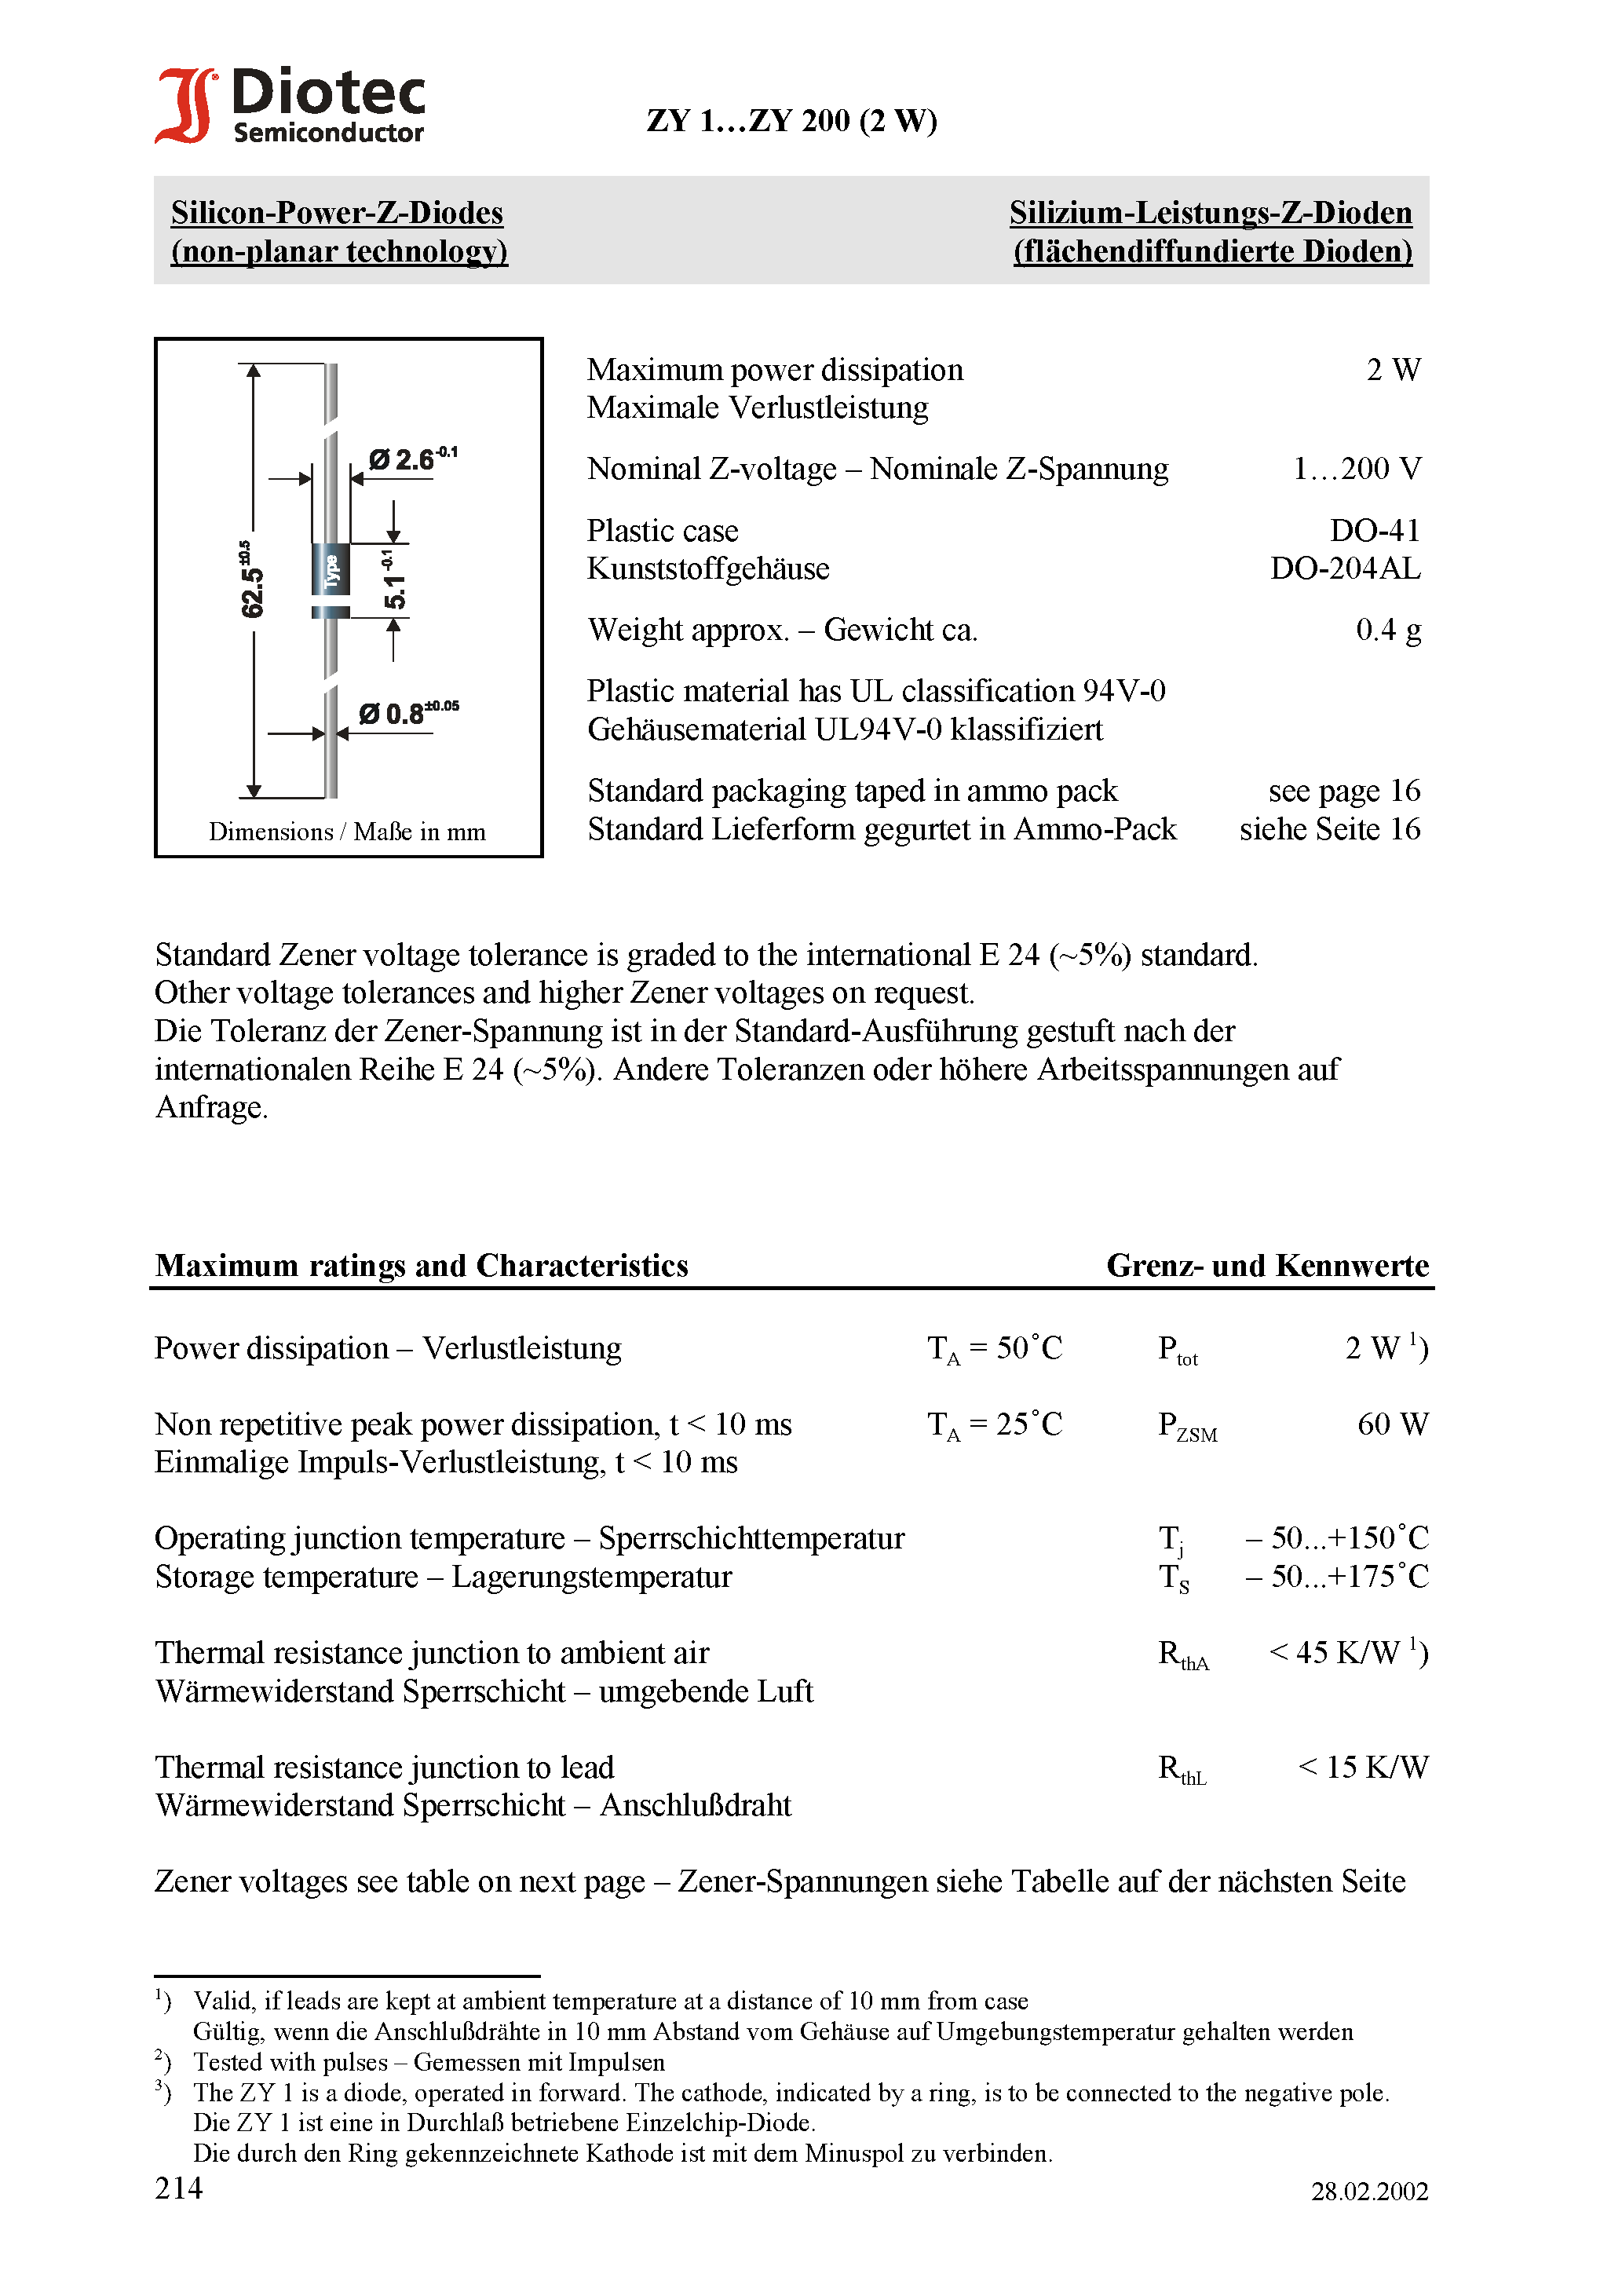 Datasheet ZY51 - Silicon-Power-Z-Diodes (non-planar technology) page 1